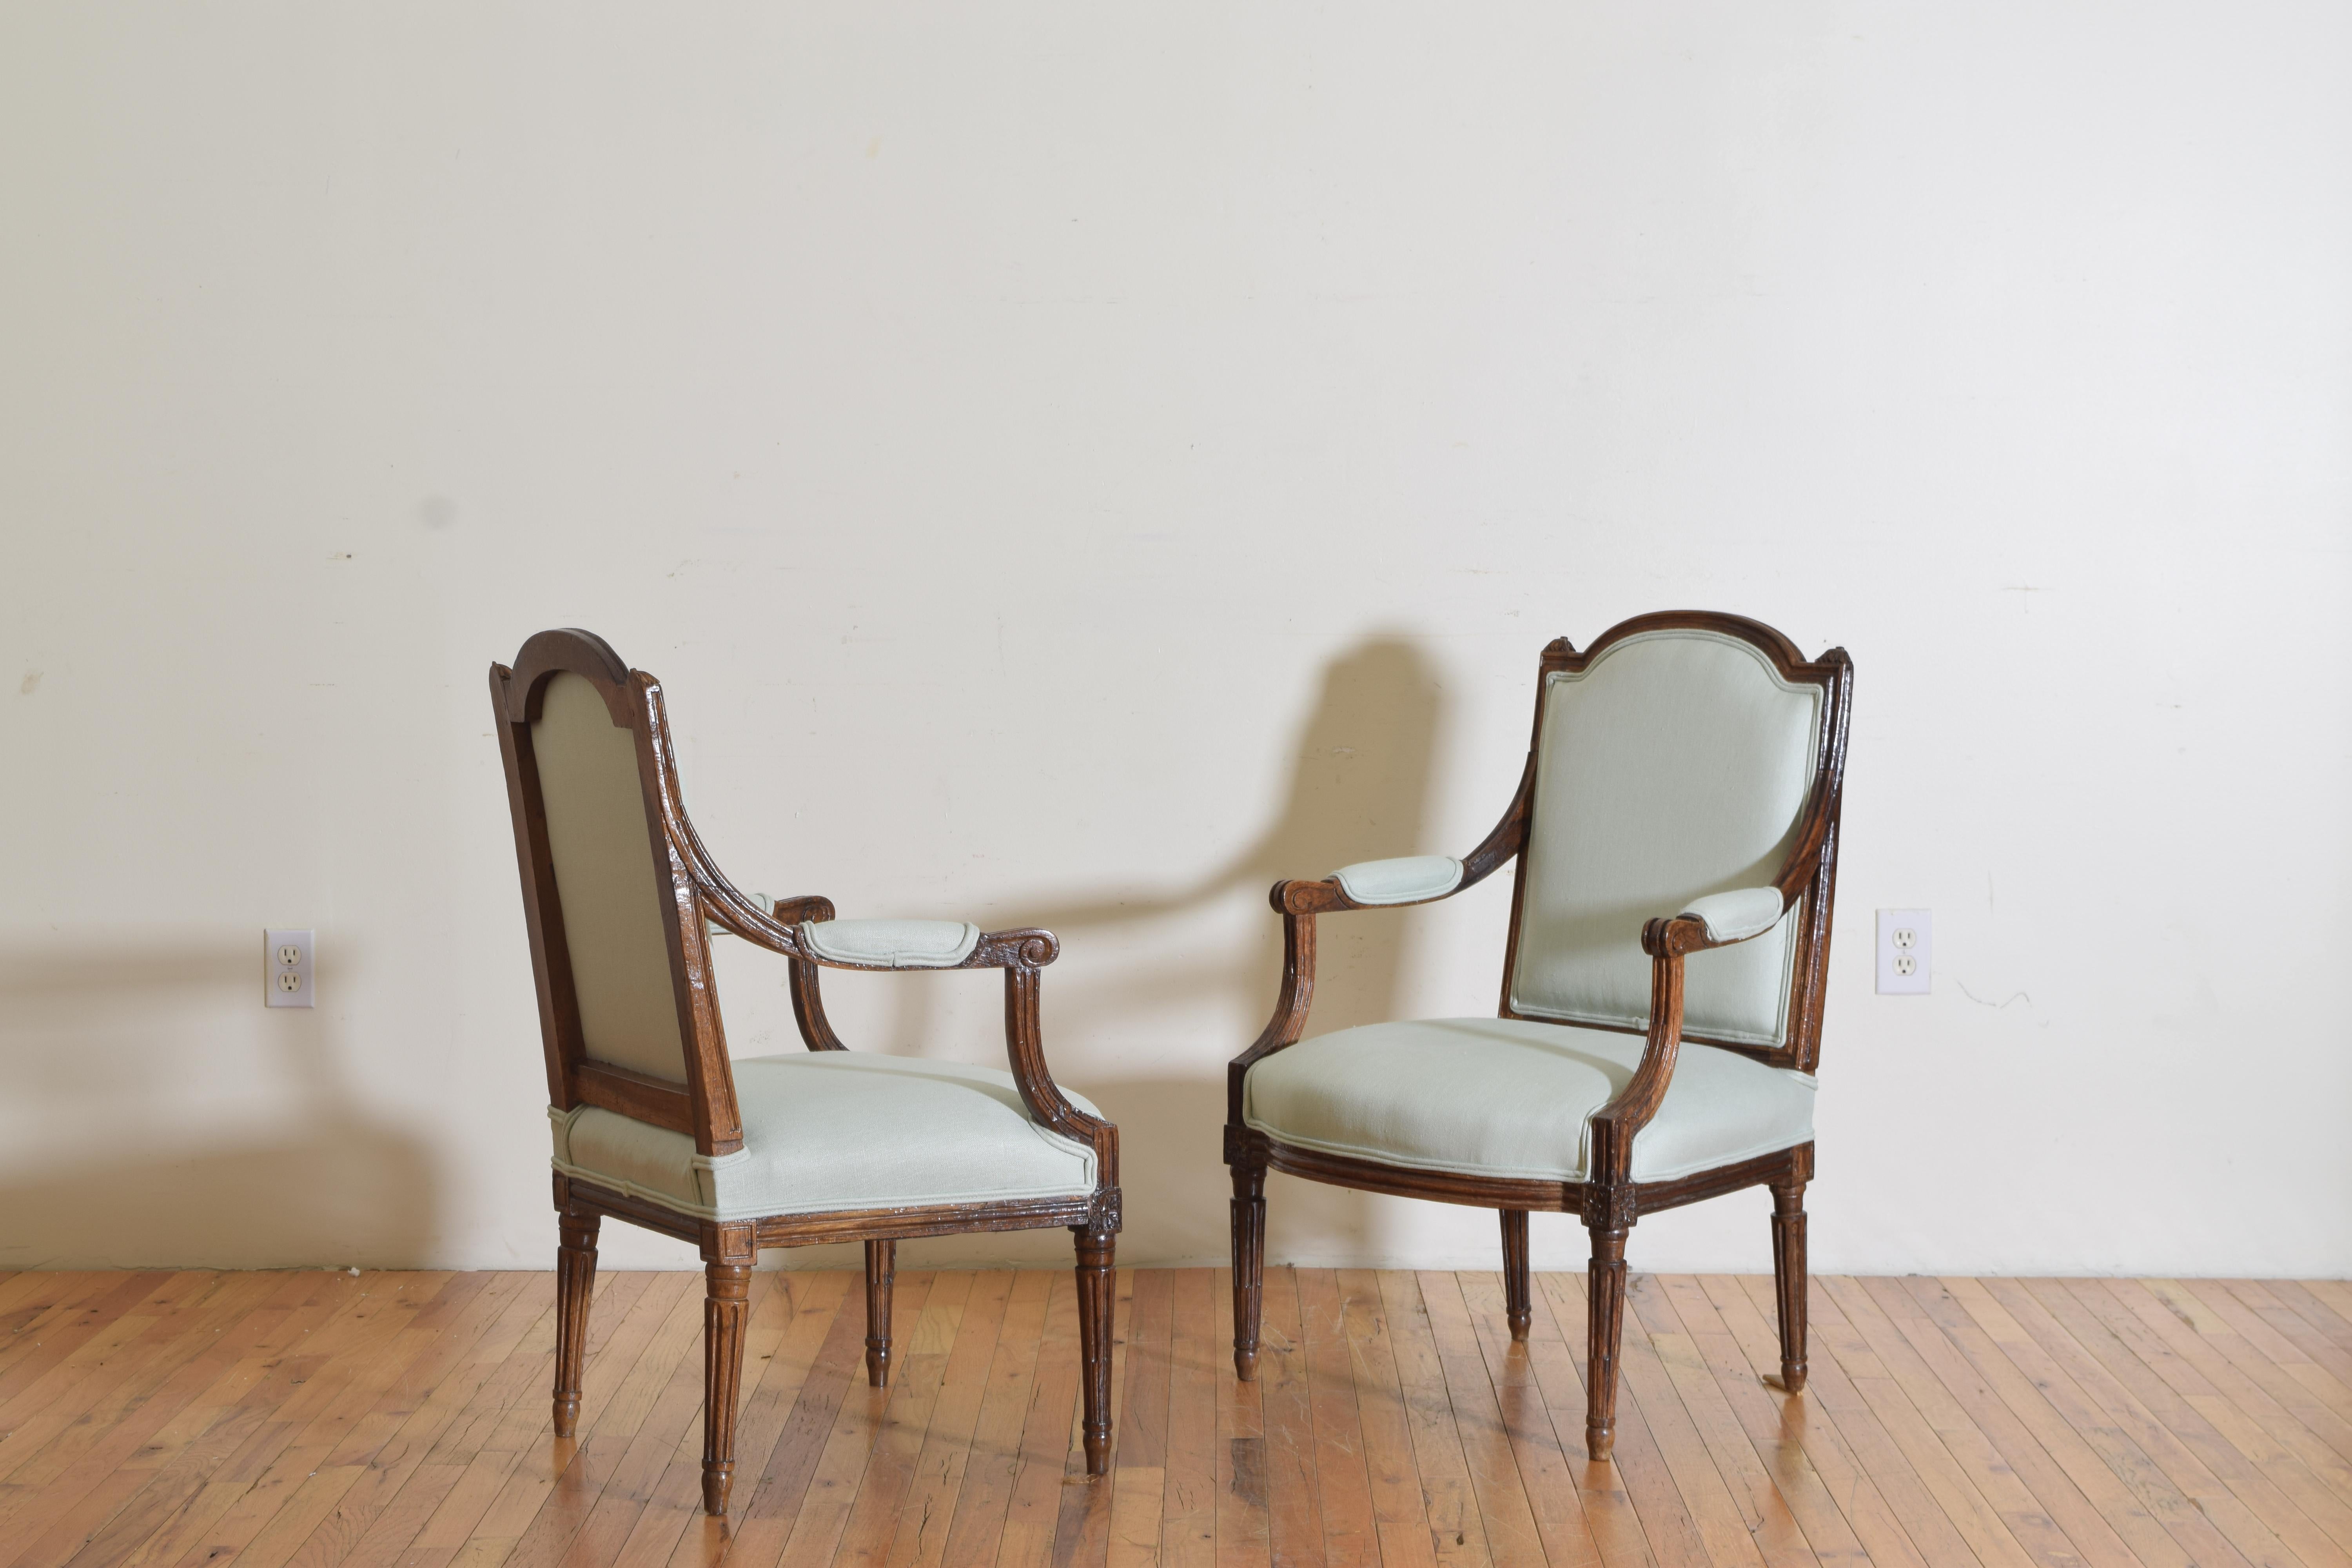 The chairs having arched backrests between small carved finials, upholstered backs and seats, the arm supports fluted as are the round tapering legs.